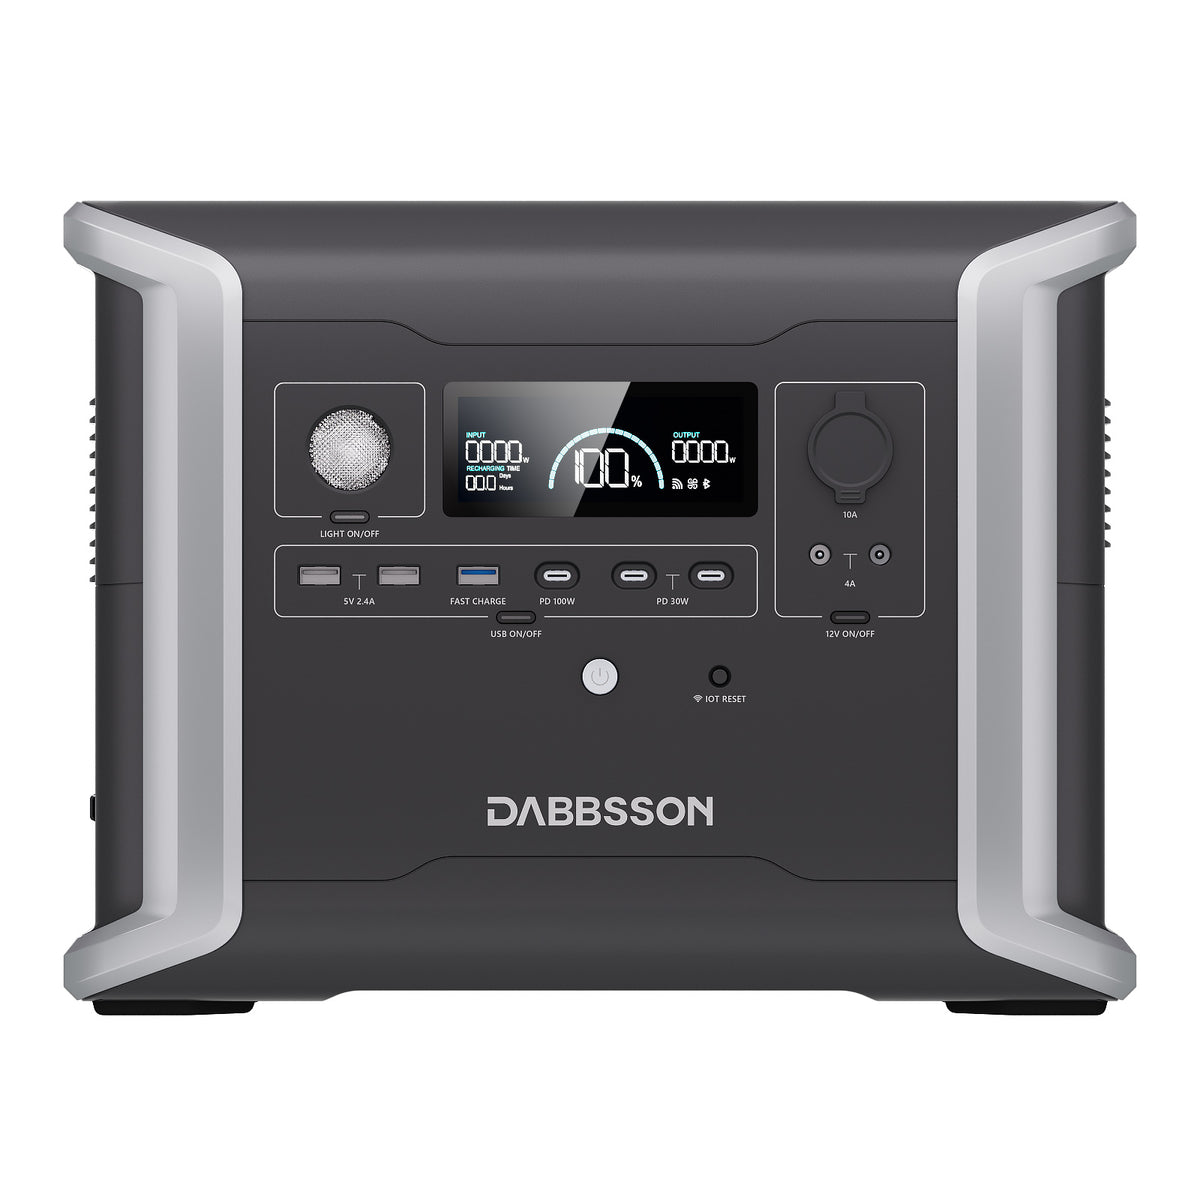 Dabbsson DBS1300 Solargenerator - 1330Wh | 1200W